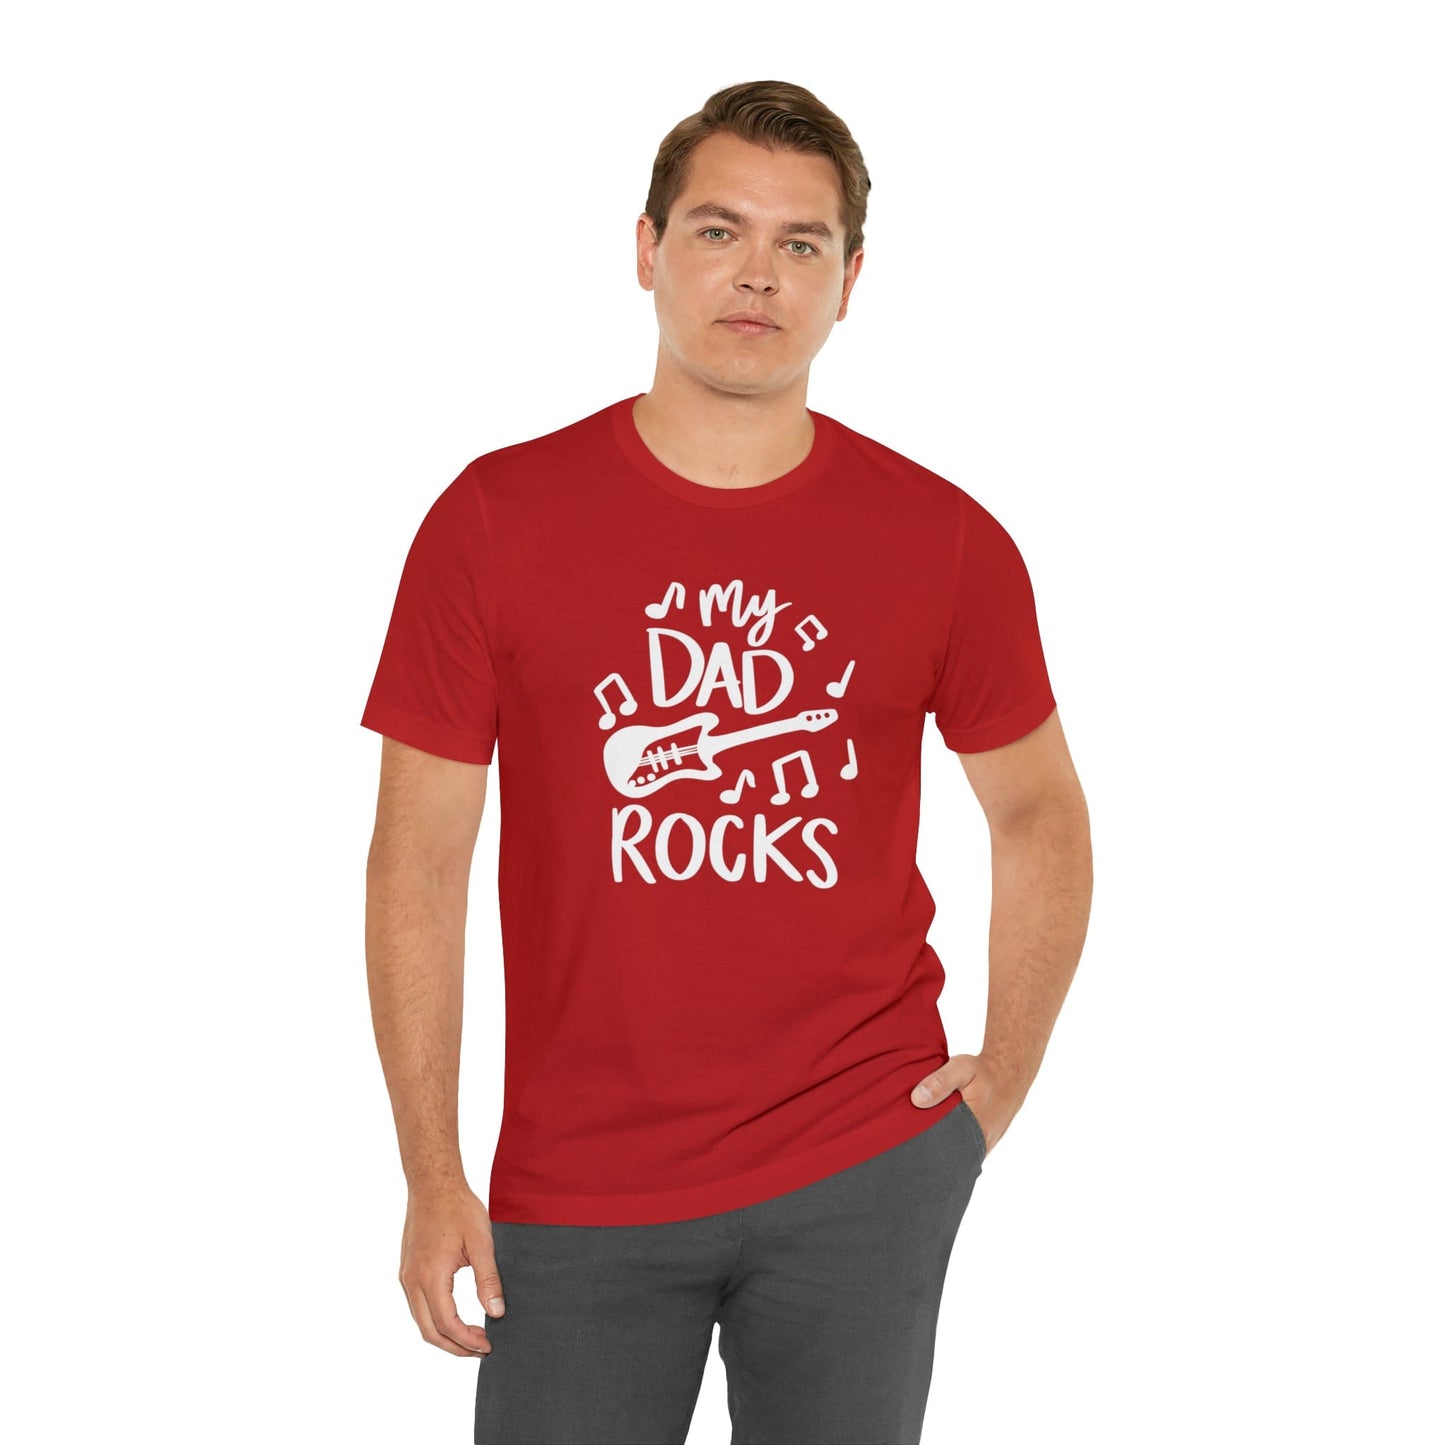 My Dad Rocks - Father's Day T-Shirt